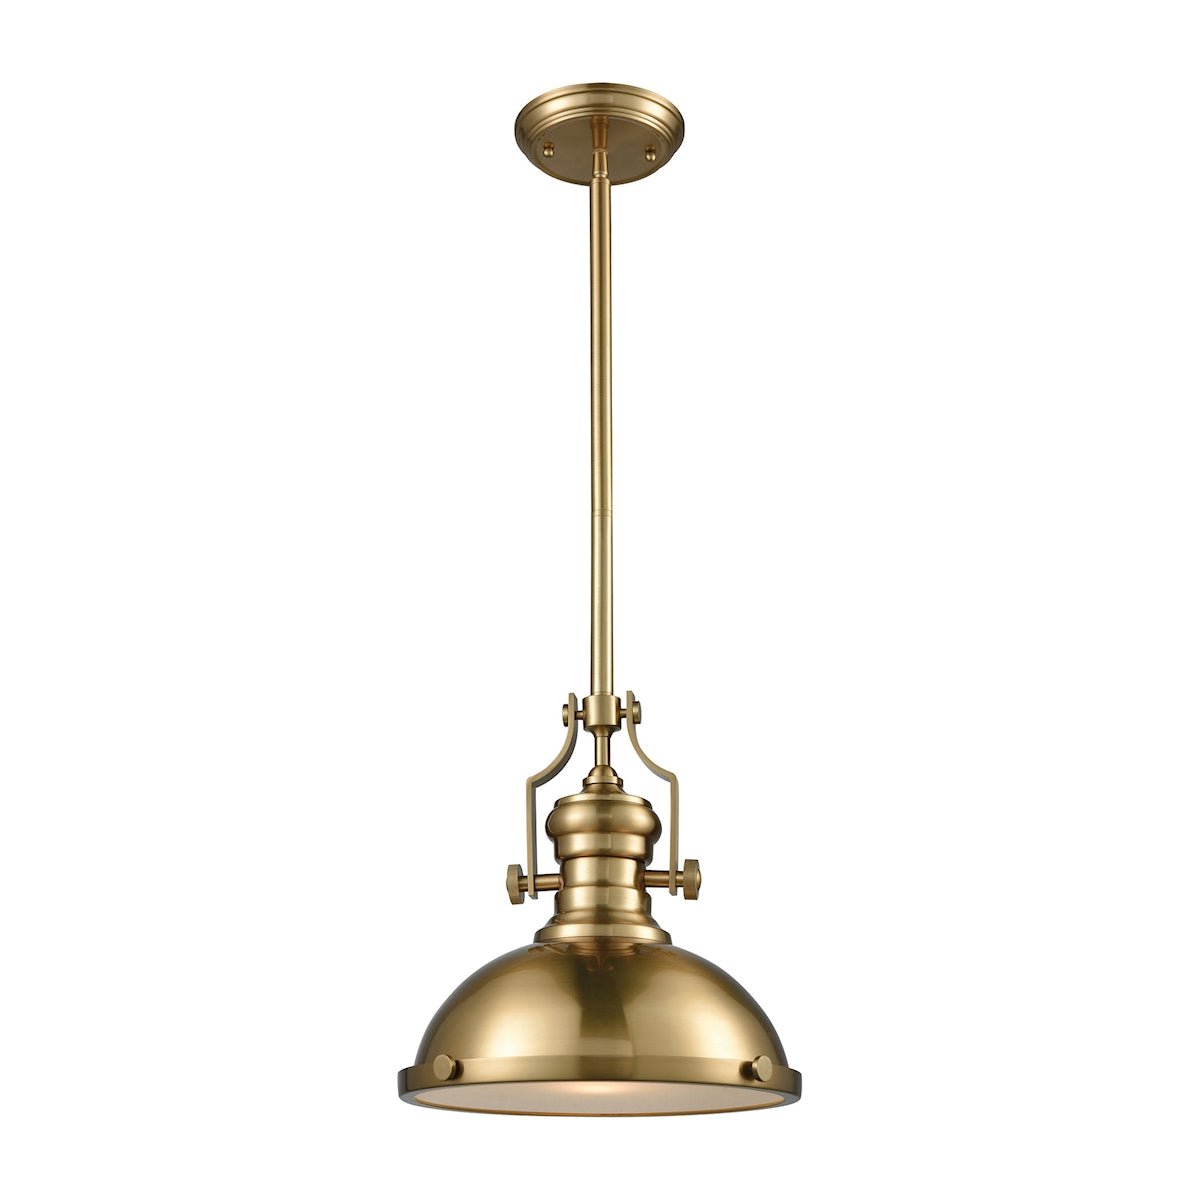 ELK Lighting 66594-1 Chadwick 1-Light Pendant in Satin Brass with Metal and Frosted Glass Diffuser